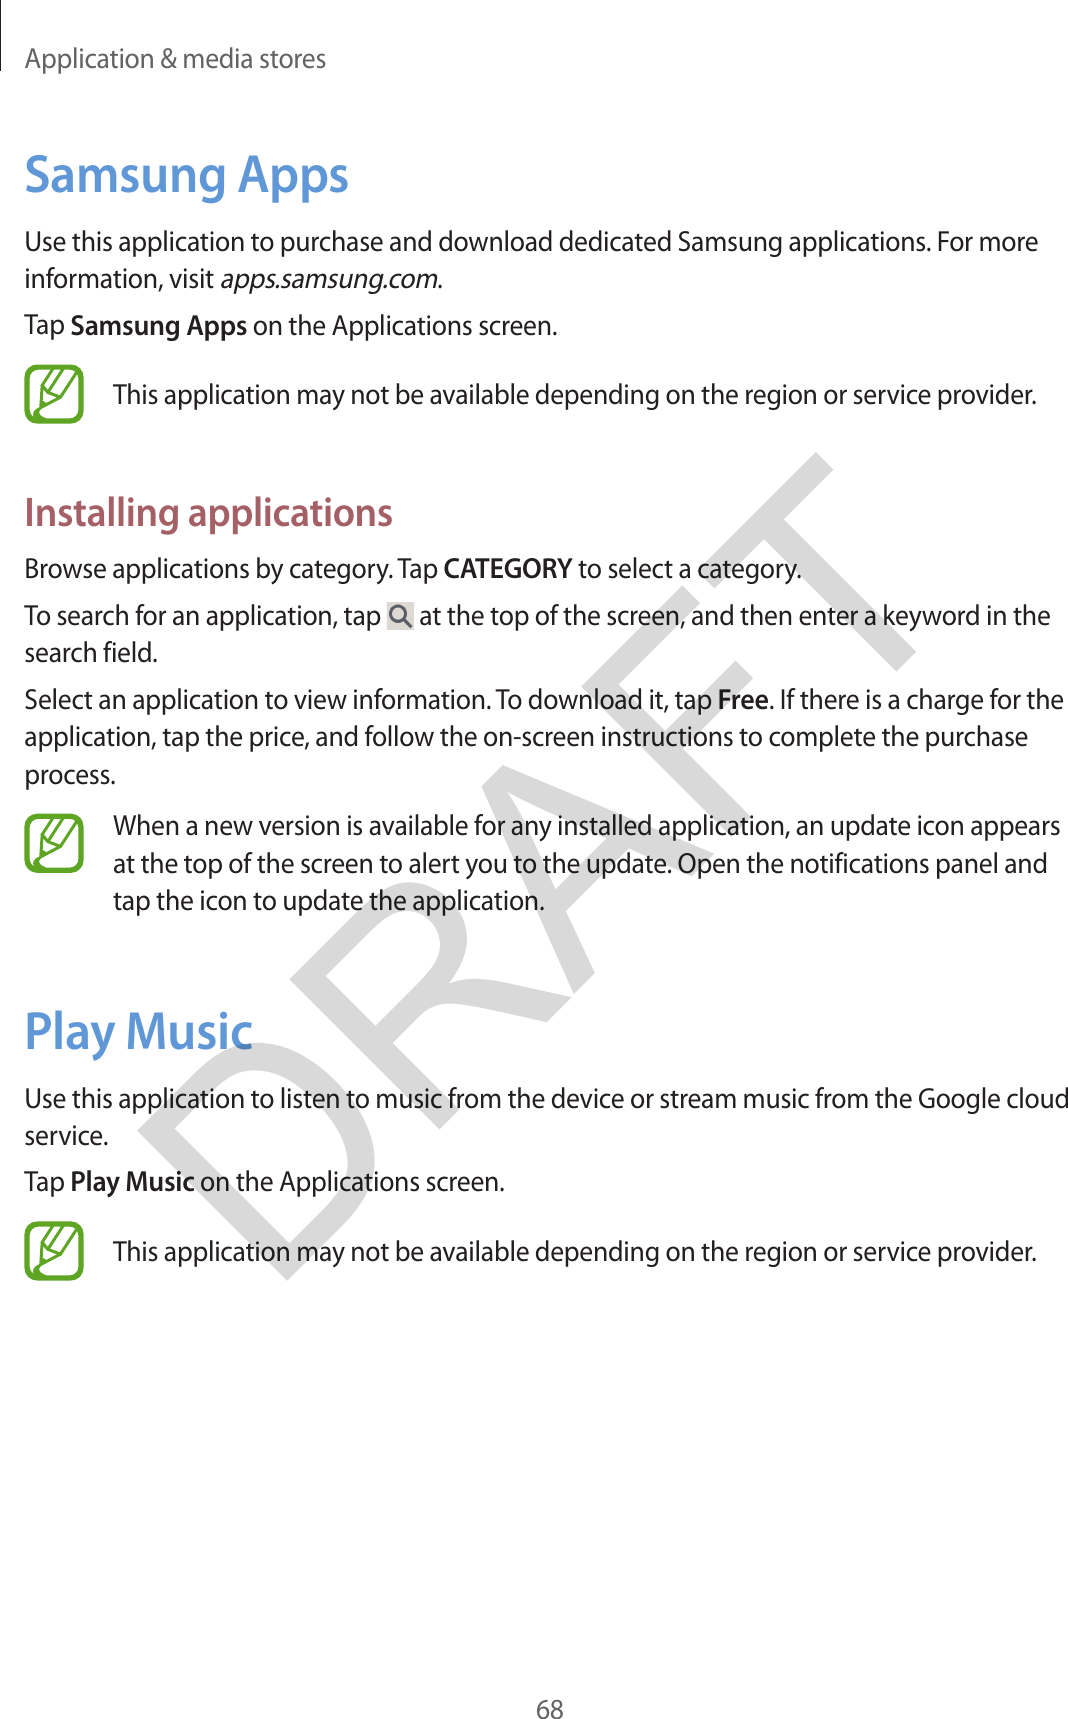 Application &amp; media stores68Samsung AppsUse this application to purchase and download dedicated Samsung applications. For more information, visit apps.samsung.com.Tap Samsung Apps on the Applications screen.This application may not be available depending on the region or service provider.Installing applicationsBrowse applications by category. Tap CATEGORY to select a category.To search for an application, tap   at the top of the screen, and then enter a keyword in the search field.Select an application to view information. To download it, tap Free. If there is a charge for the application, tap the price, and follow the on-screen instructions to complete the purchase process.When a new version is available for any installed application, an update icon appears at the top of the screen to alert you to the update. Open the notifications panel and tap the icon to update the application.Play MusicUse this application to listen to music from the device or stream music from the Google cloud service.Tap Play Music on the Applications screen.This application may not be available depending on the region or service provider.DRAFT